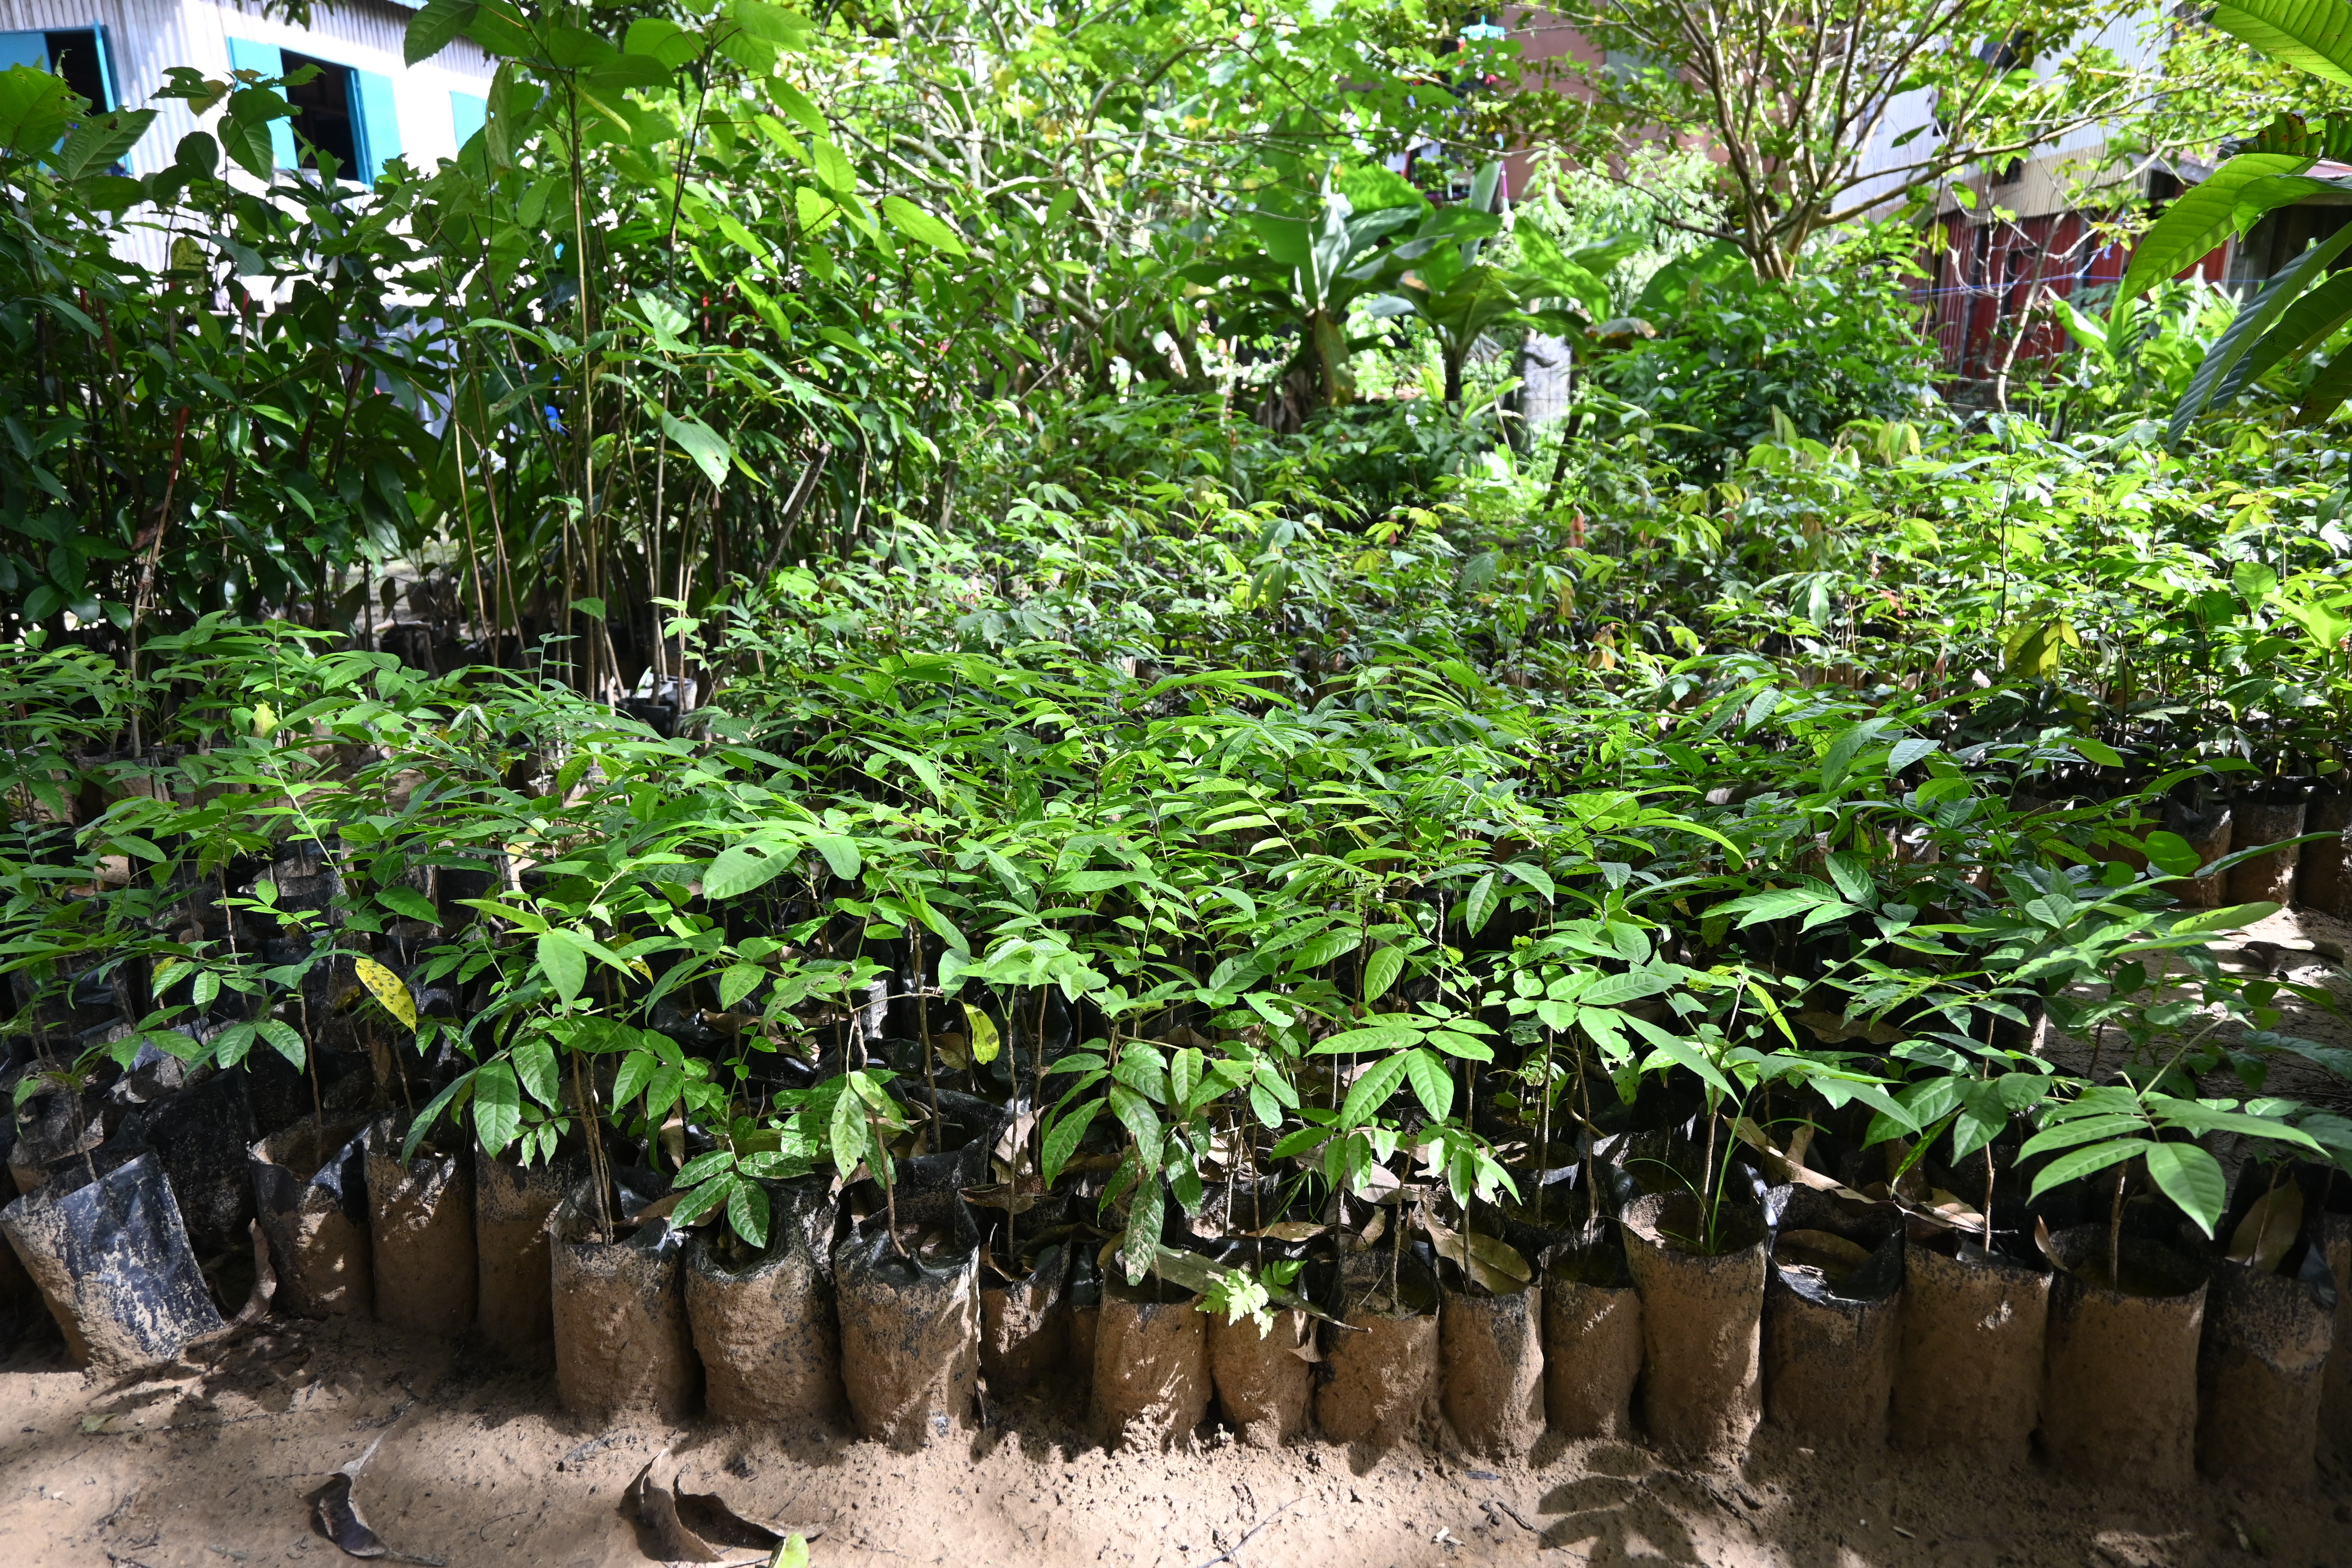 Seedlings of various species and ages growing in a nursery, soon to be planted in degraded forest adjacent to the Kinabatangan River, Sabah, Malaysian Borneo